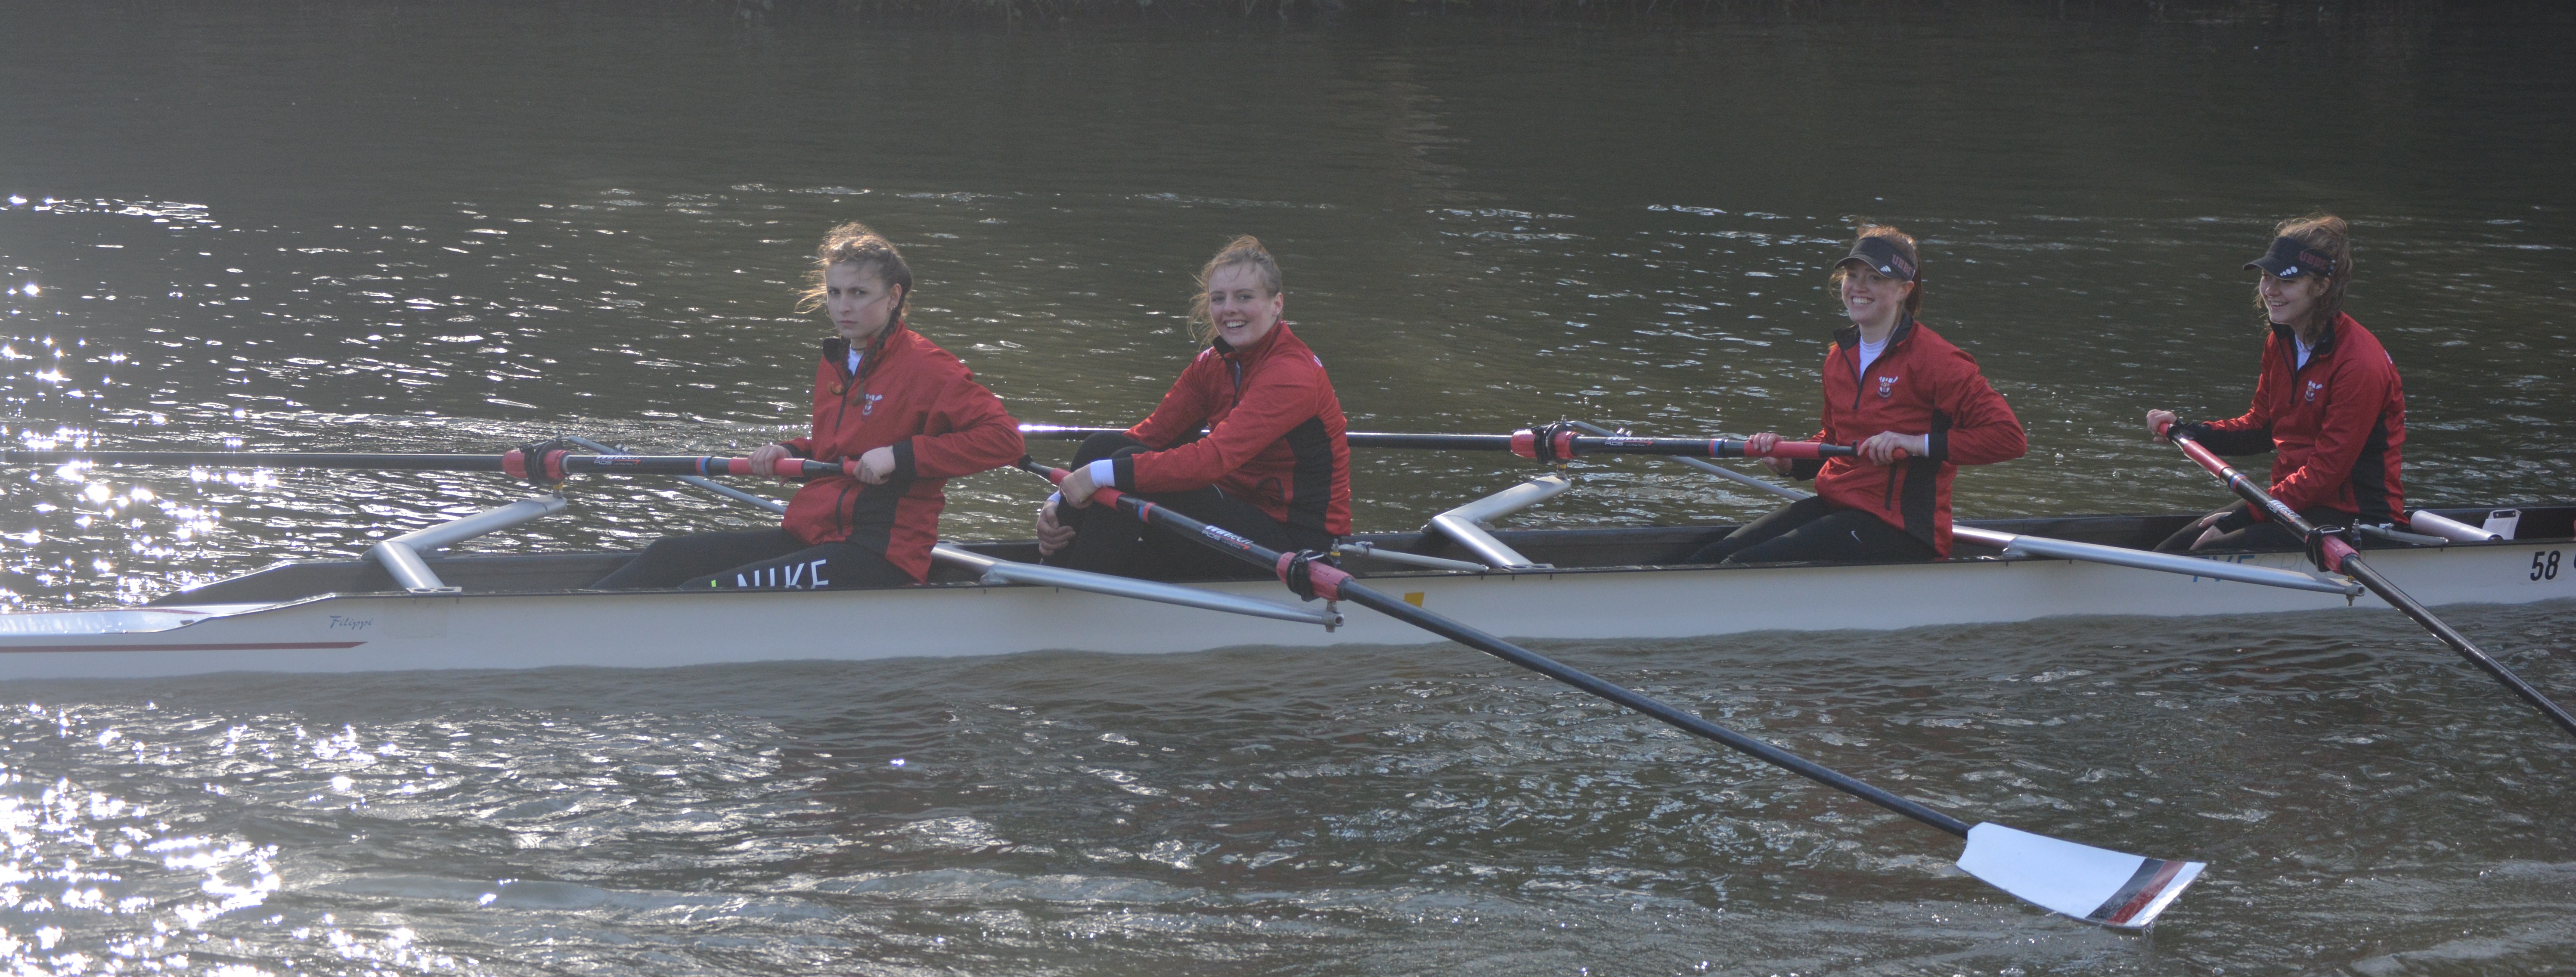 Our Novice Women’s 4+ making their way to the start line.